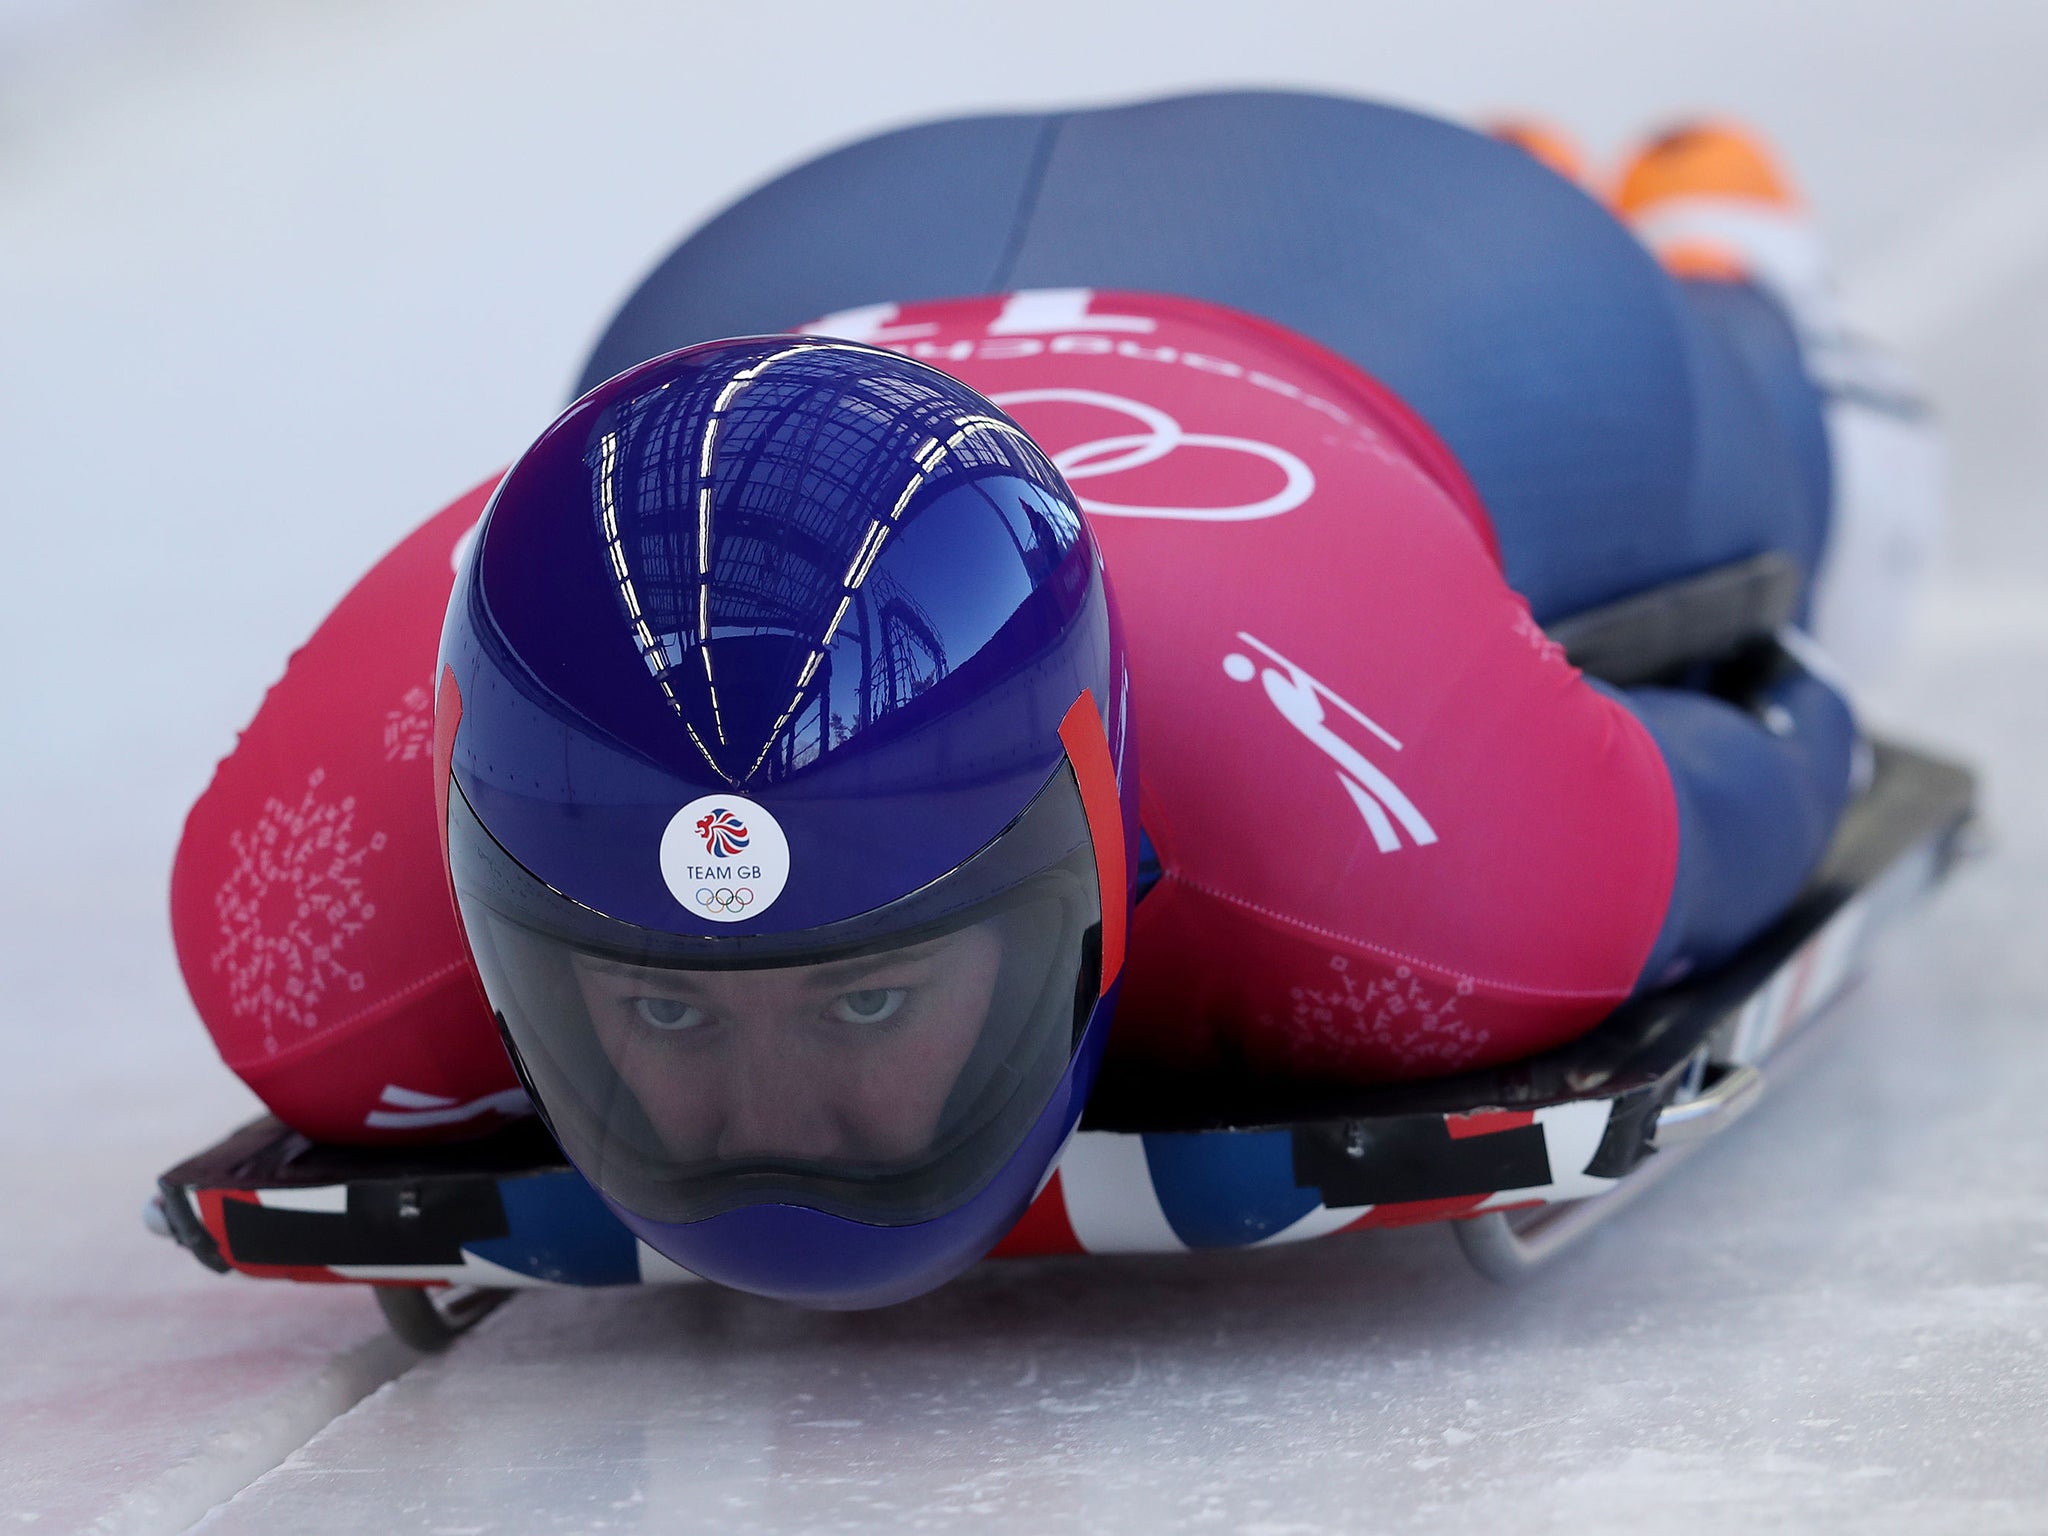 Lizzy Yarnold managed to finish third and fourth fastest with her two practice runs